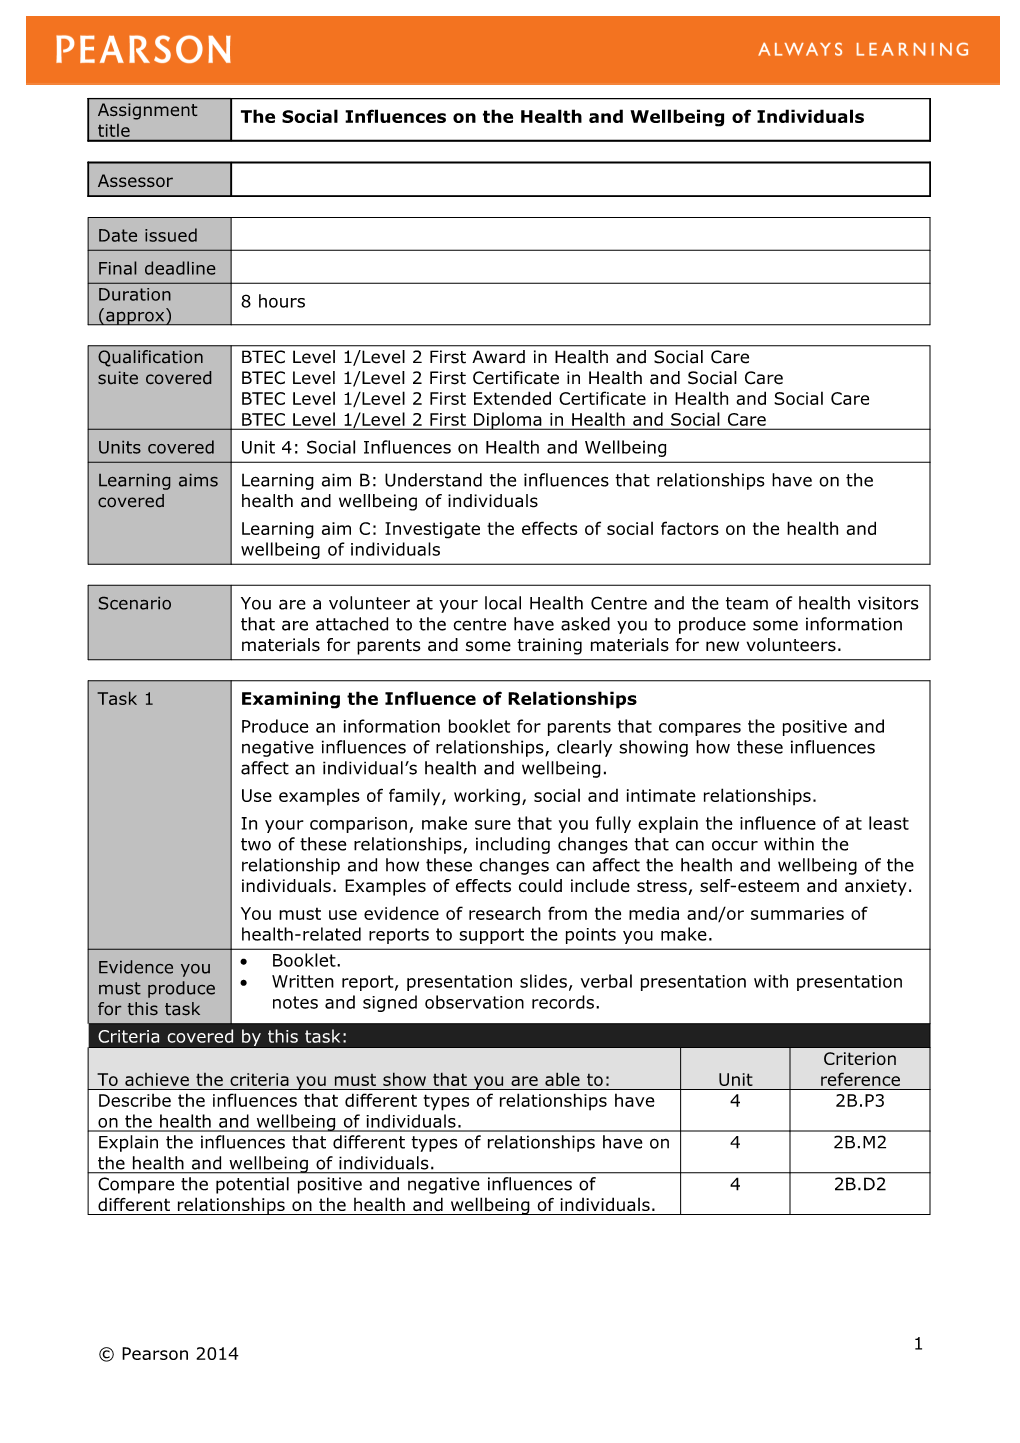 Unit 4: Social Influences on Health and Wellbeing - Authorised Assignment Brief for Learning